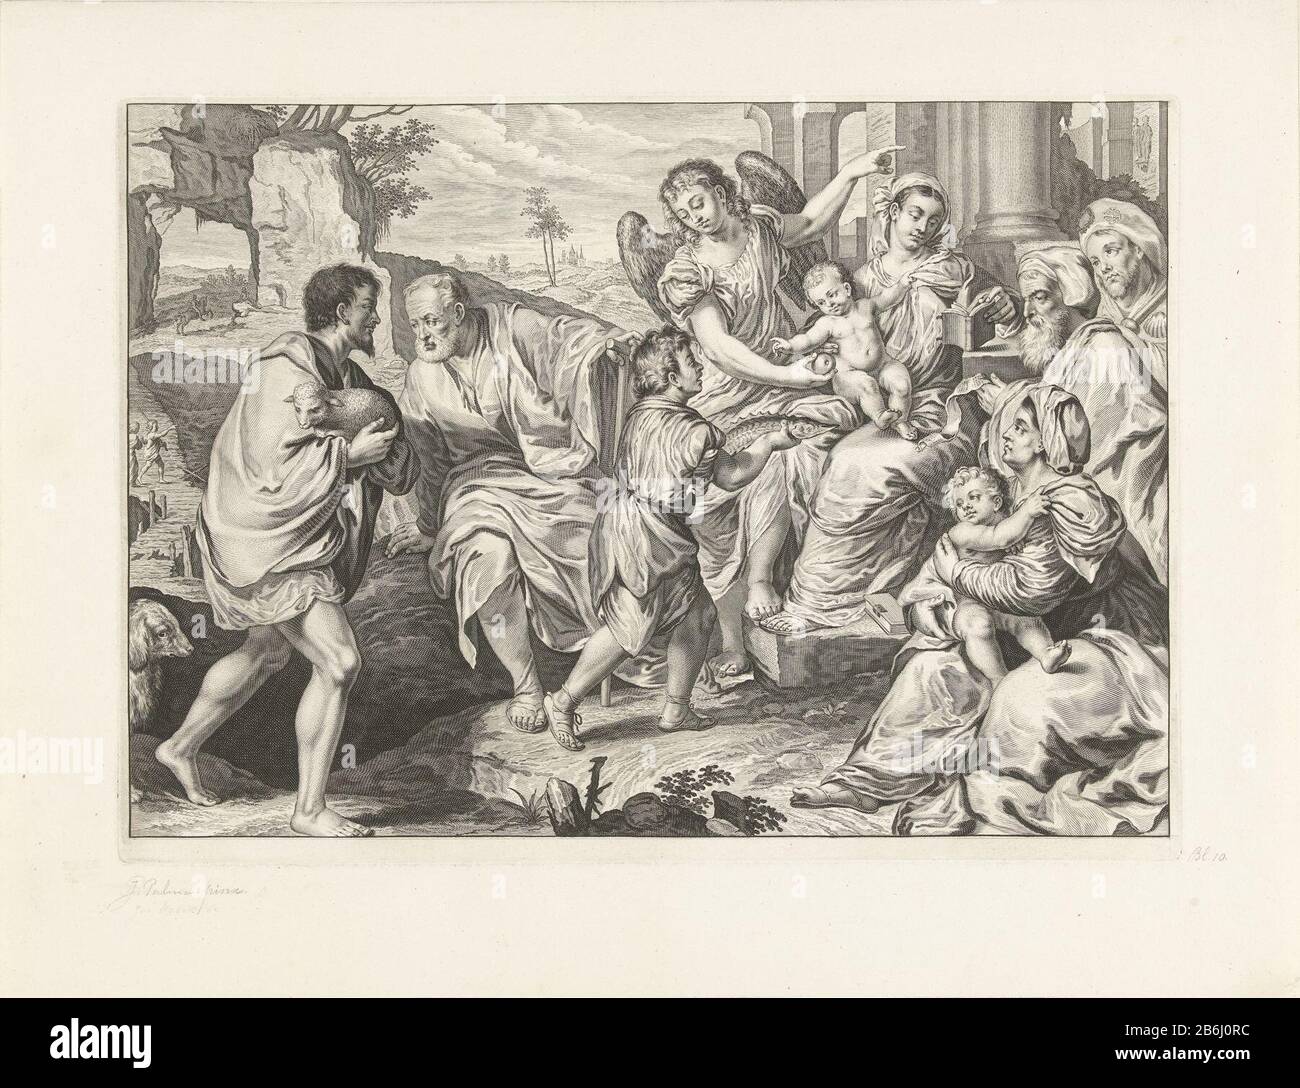 The holy family in the company of others In a mountainous landscape is Mary with Christ on her lap. She reads a book, while an angel Christ affords a apple and Tobias shows him a fish. Joseph talking to a man with a lamb in his arms and John Elizabeth has her son on her lap. Behind Elizabeth are two pelgrims. Manufacturer : print maker: Jeremias Falck to painting of: Bonifazio Veronesenaar painting of: Jacopo Palma (il Vecchio) (rejected attribution) Place manufacture: print maker: Amsterdam To painting of: Italy To painting of: Italy Date: 1655 - 1677 Physical features: engra material: paper Stock Photo